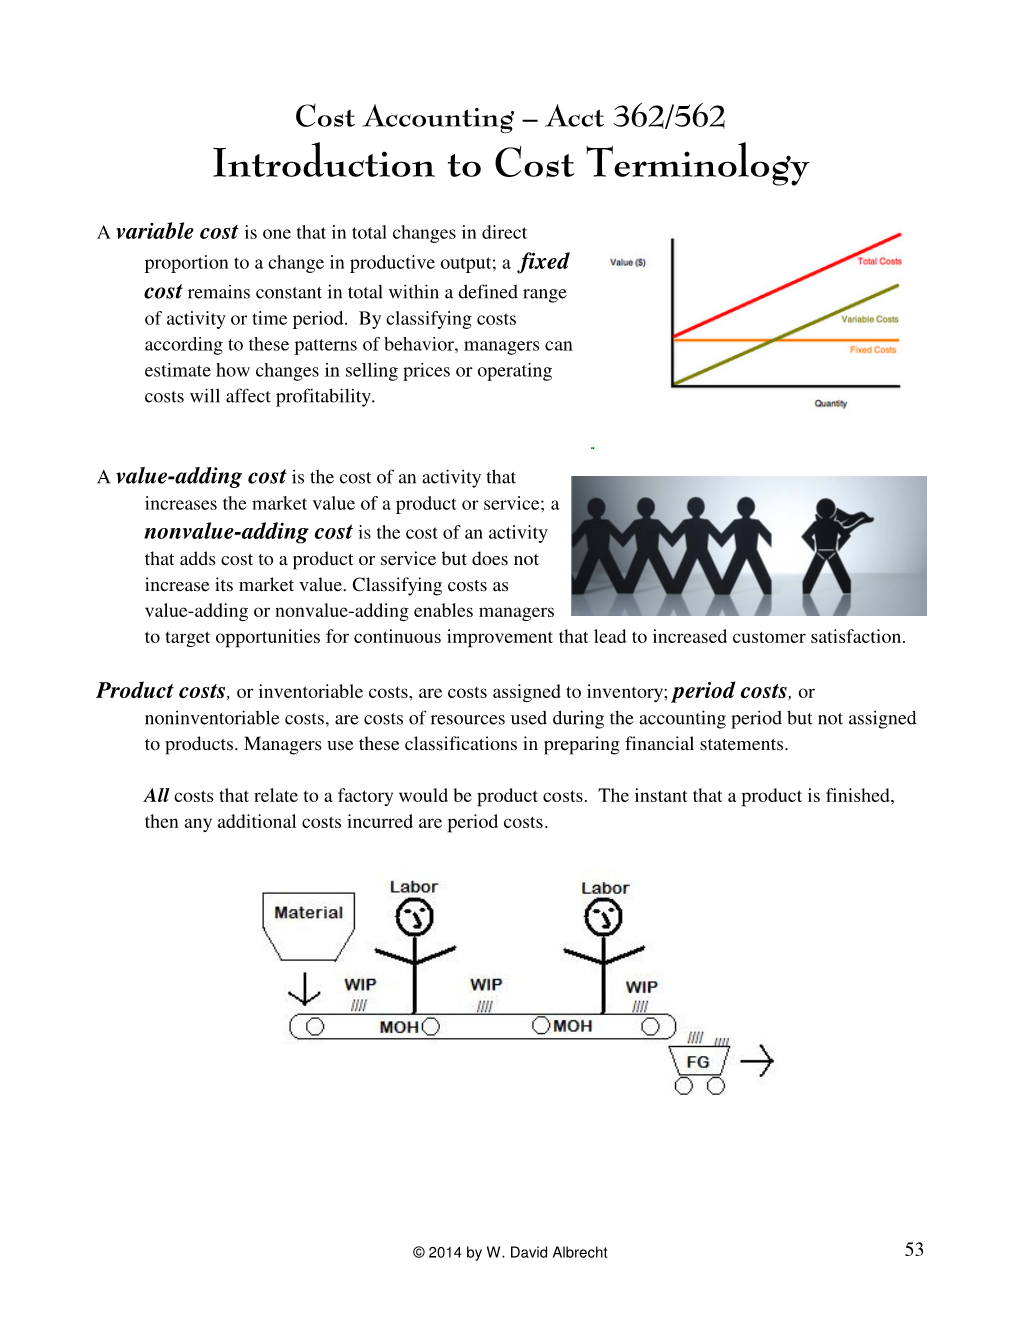 Cost Accounting – Acct 362/562 Introduction to Cost Terminology